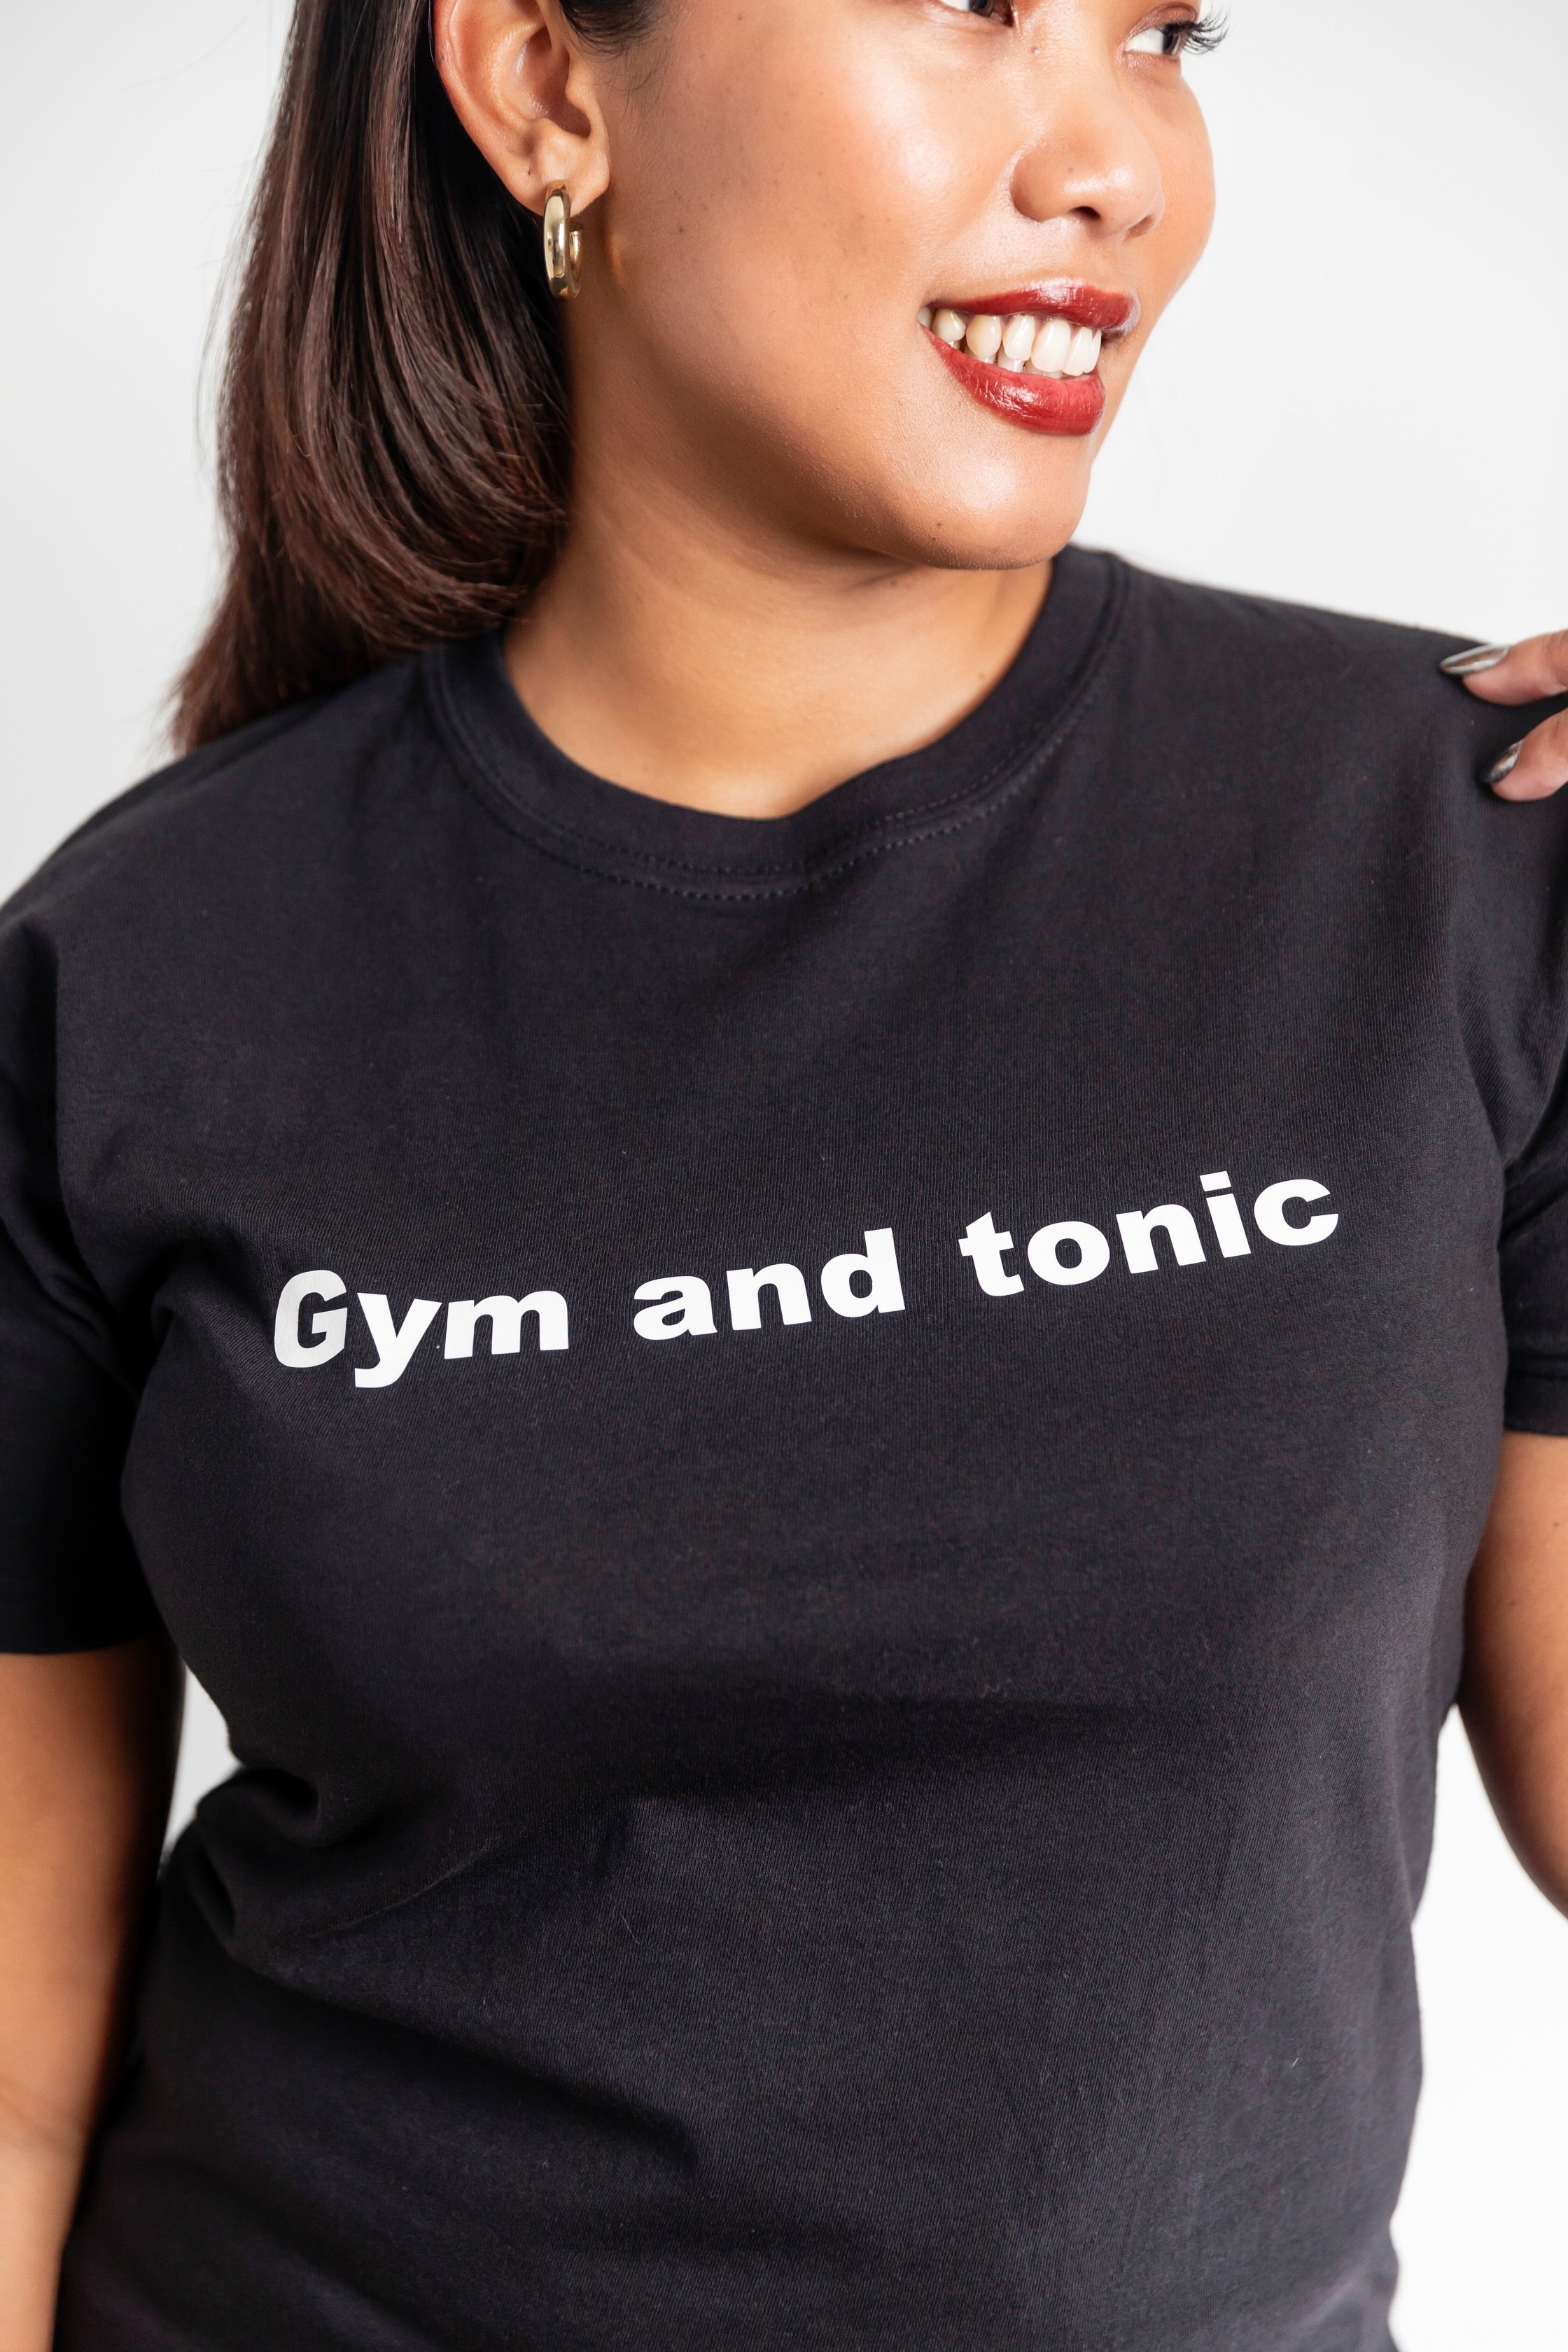 Gym and Tonic Slogan Tee In Black